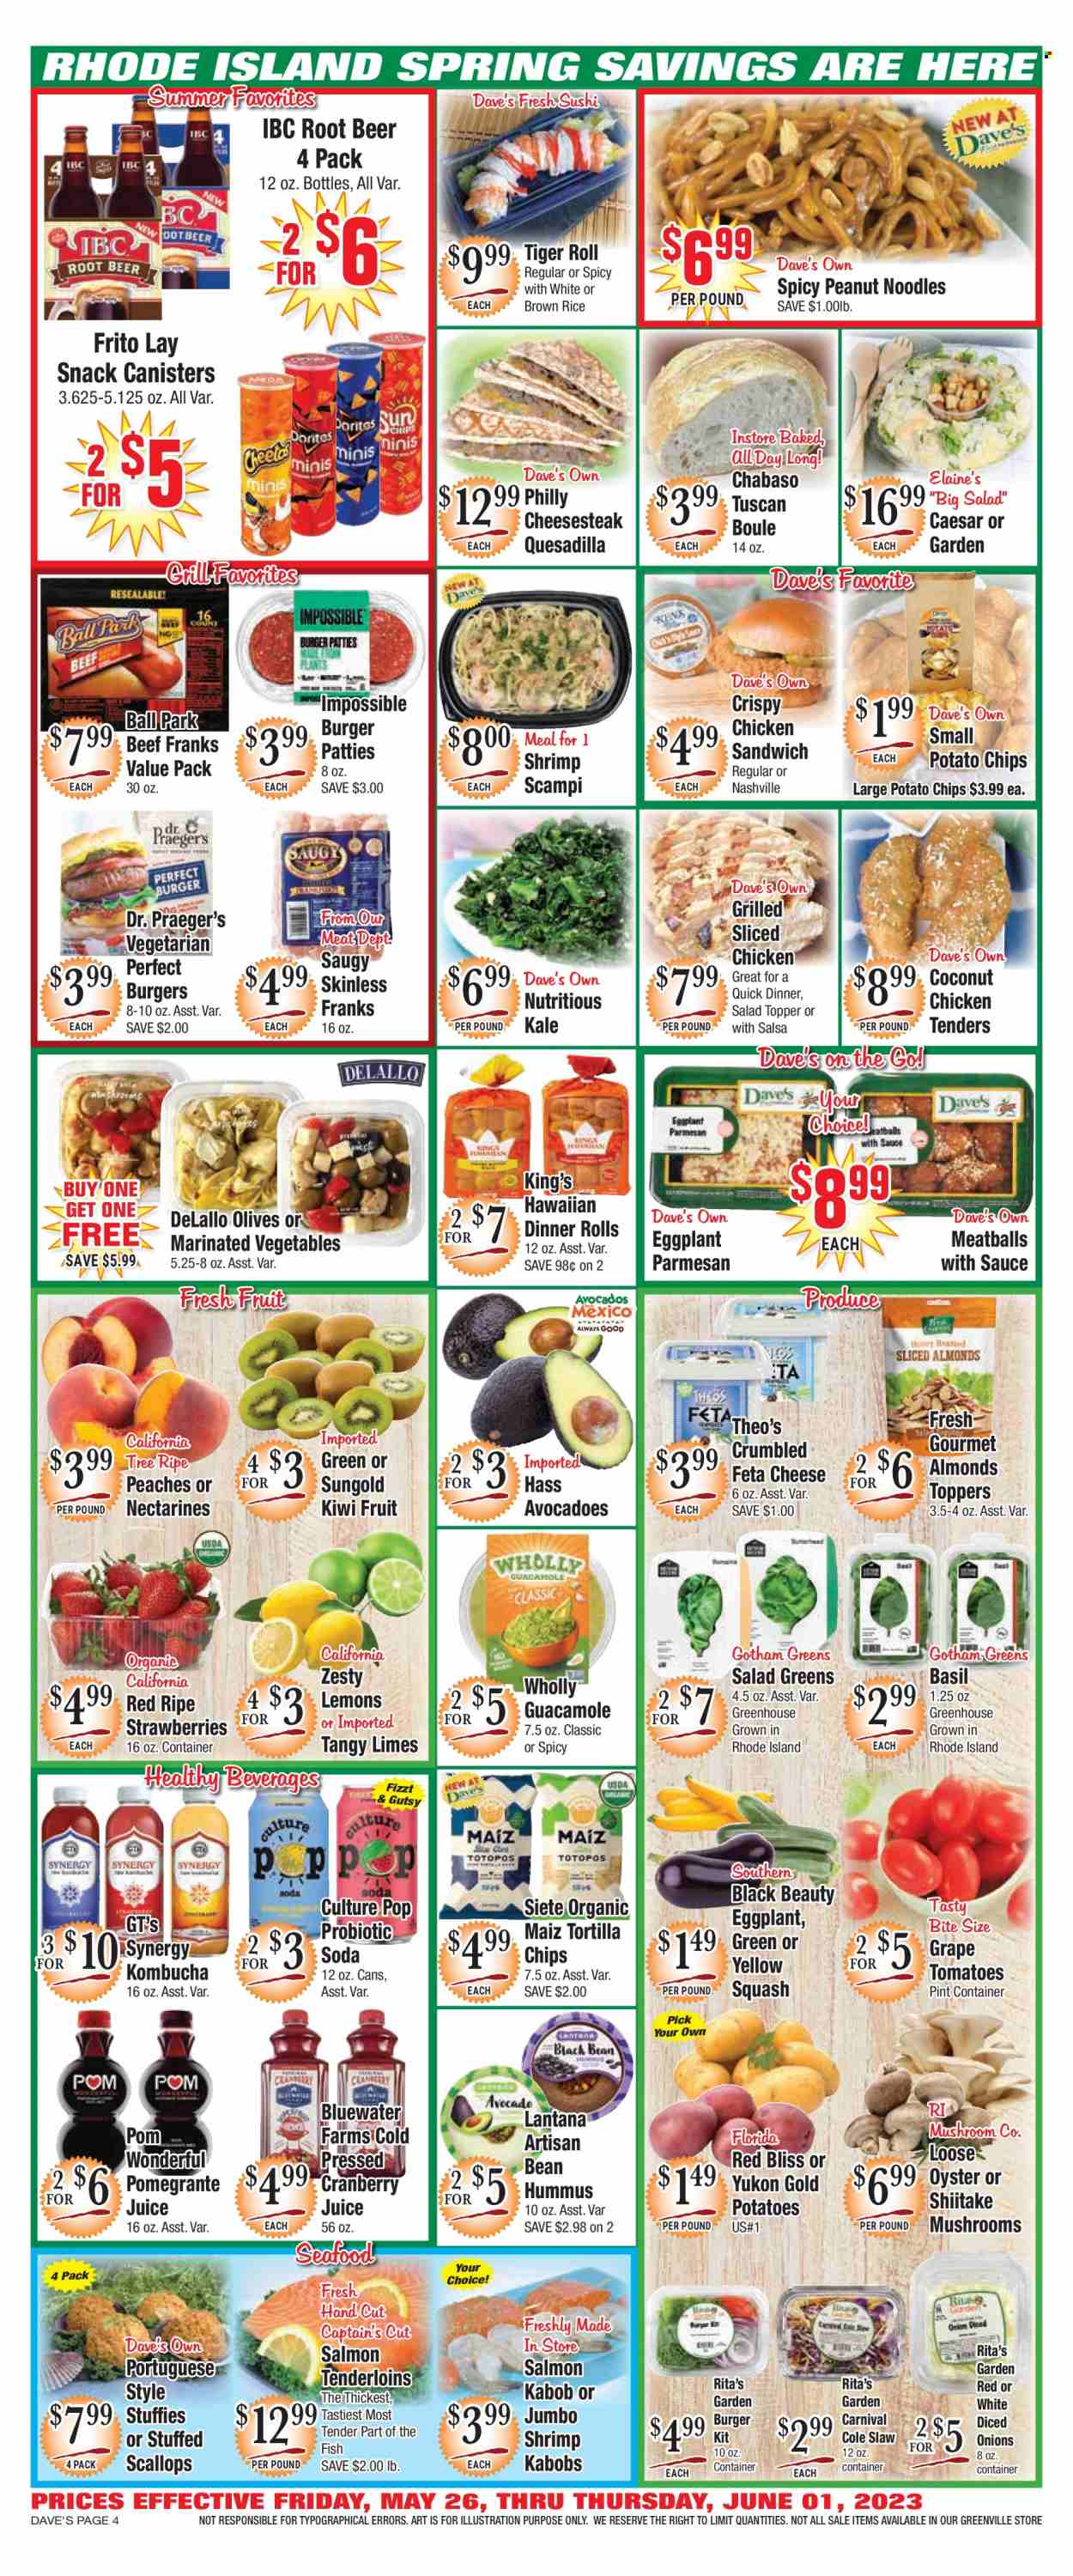 thumbnail - Dave's Fresh Marketplace Flyer - 05/26/2023 - 06/01/2023 - Sales products - mushrooms, dinner rolls, kale, onion, salad, eggplant, yellow squash, kiwi, limes, strawberries, coconut, peaches, salmon, scallops, oysters, seafood, fish, shrimps, sushi, chicken tenders, meatballs, sandwich, hamburger, fried chicken, noodles, ready meal, chicken sandwich, snack, frankfurters, hummus, guacamole, parmesan, feta, tortilla chips, potato chips, chips, olives, brown rice, salsa, almonds, cranberry juice, juice, soda, kombucha, alcohol, beer, burger patties, Go!, nectarines, salad greens, lemons. Page 4.